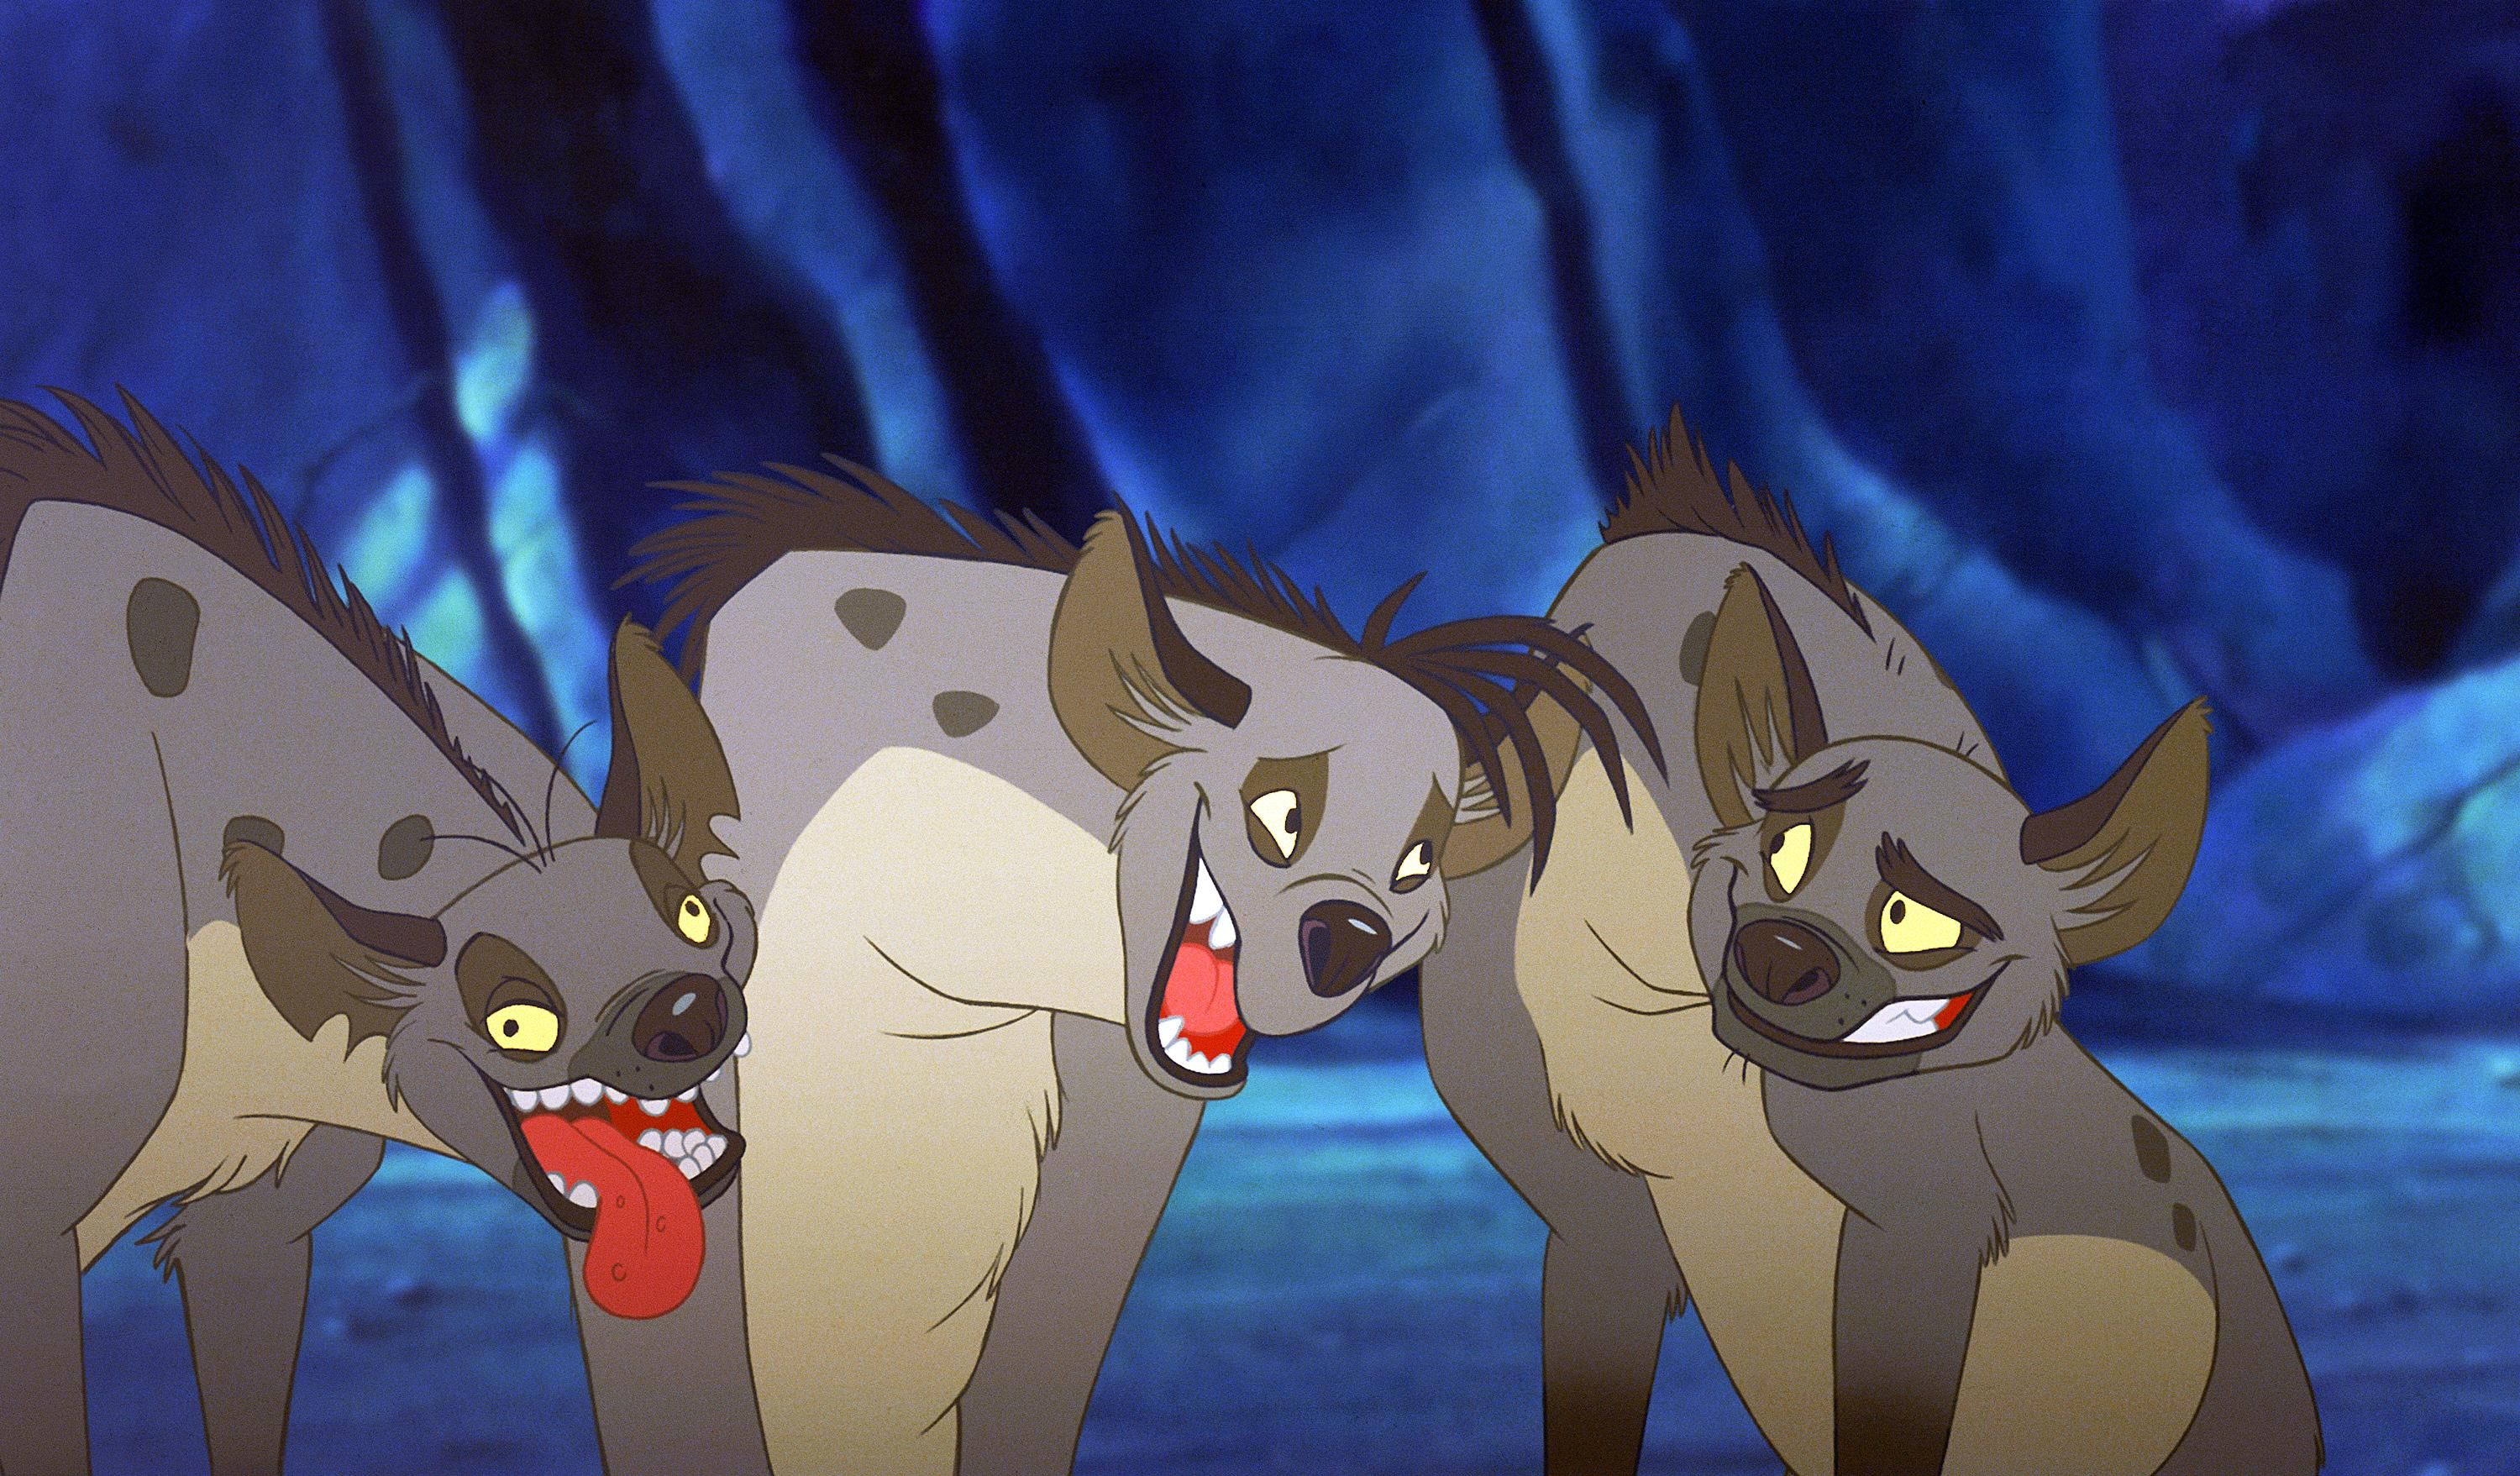 How 'The Lion King' and Other Disney Movies Portray Class Negatively